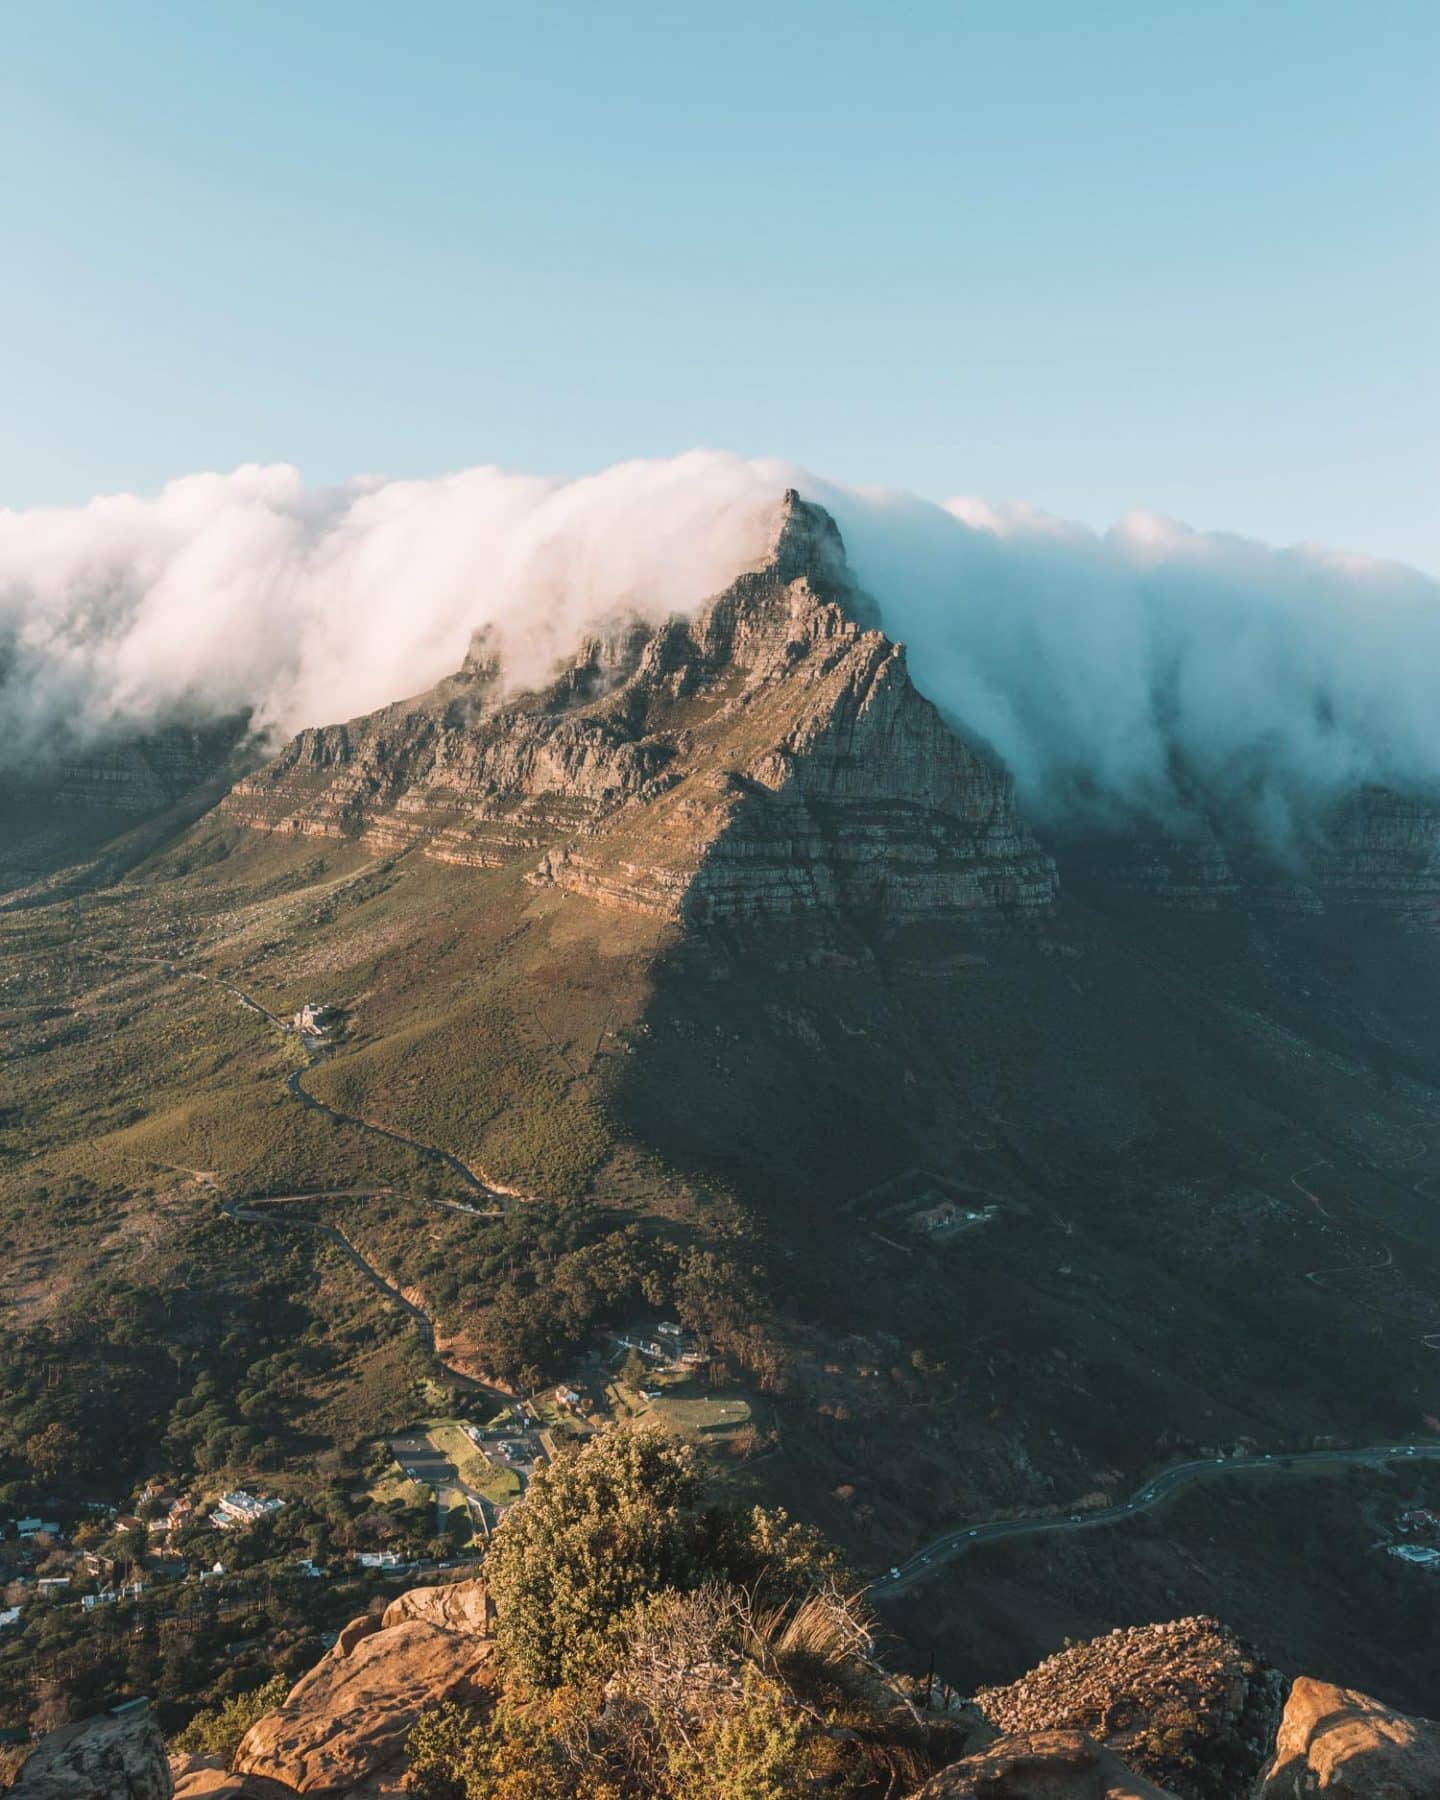 table mountain in cape town